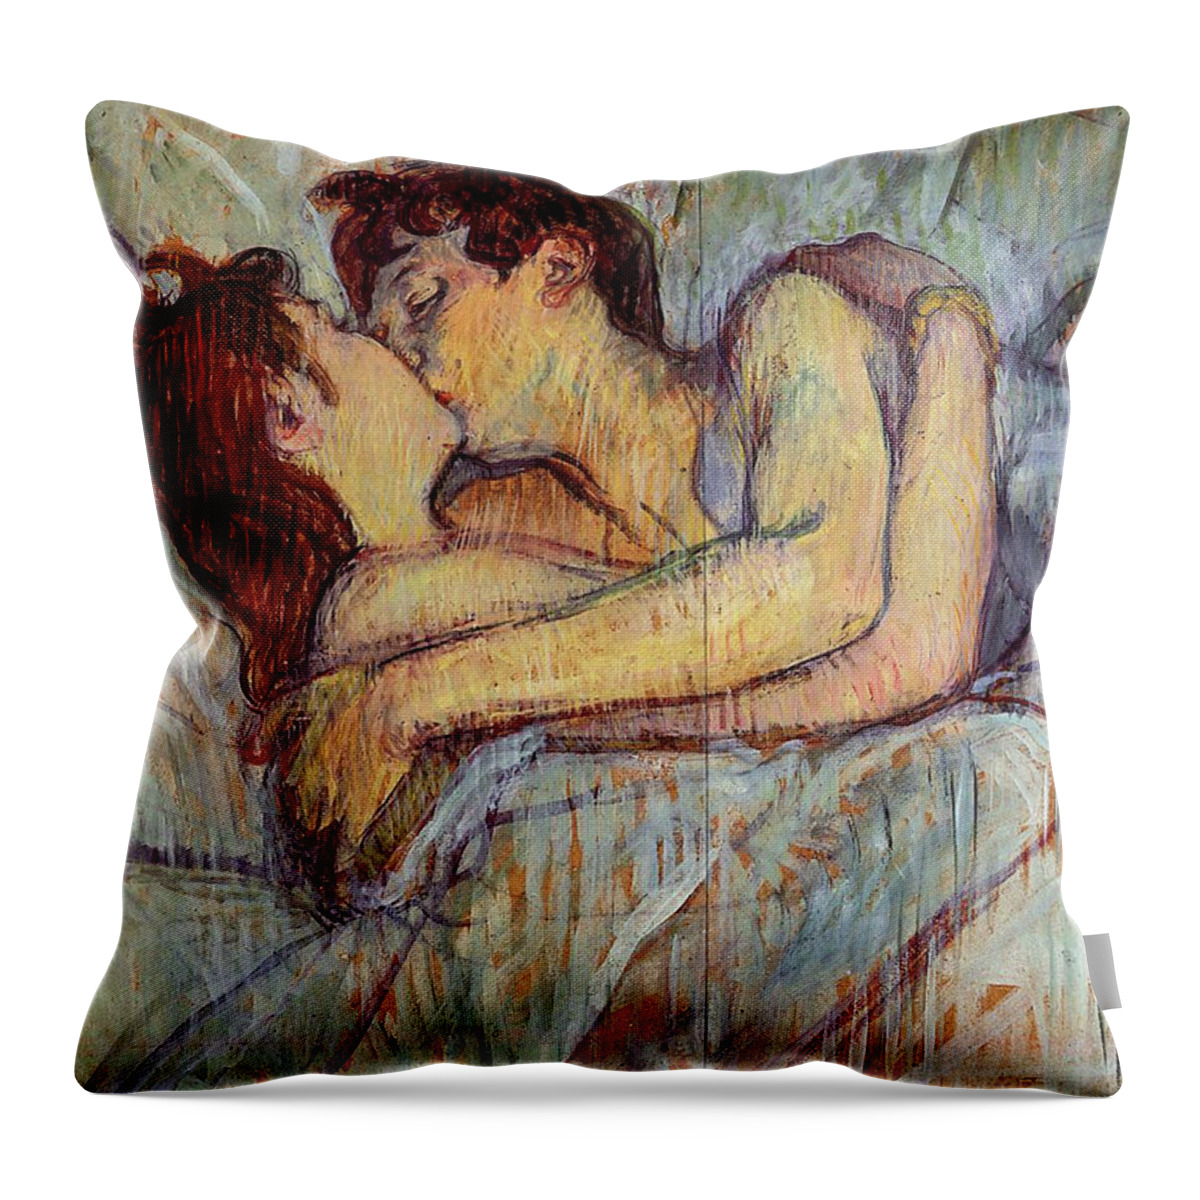 Figurative Throw Pillow featuring the painting In Bed, The Kiss #3 by Henri de Toulouse Lautrec